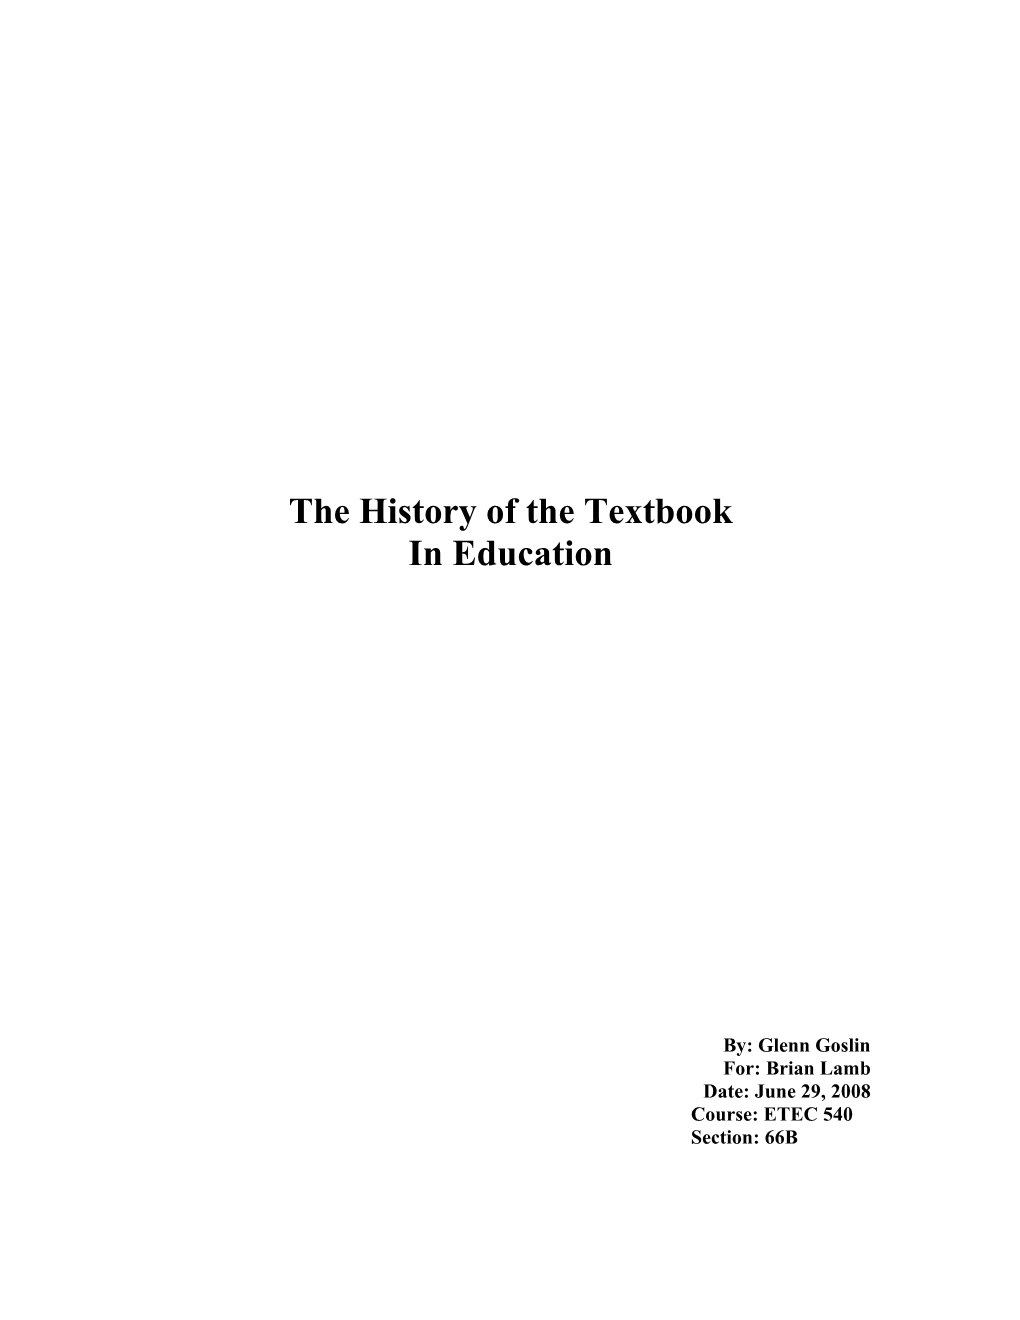 History of the Textbook